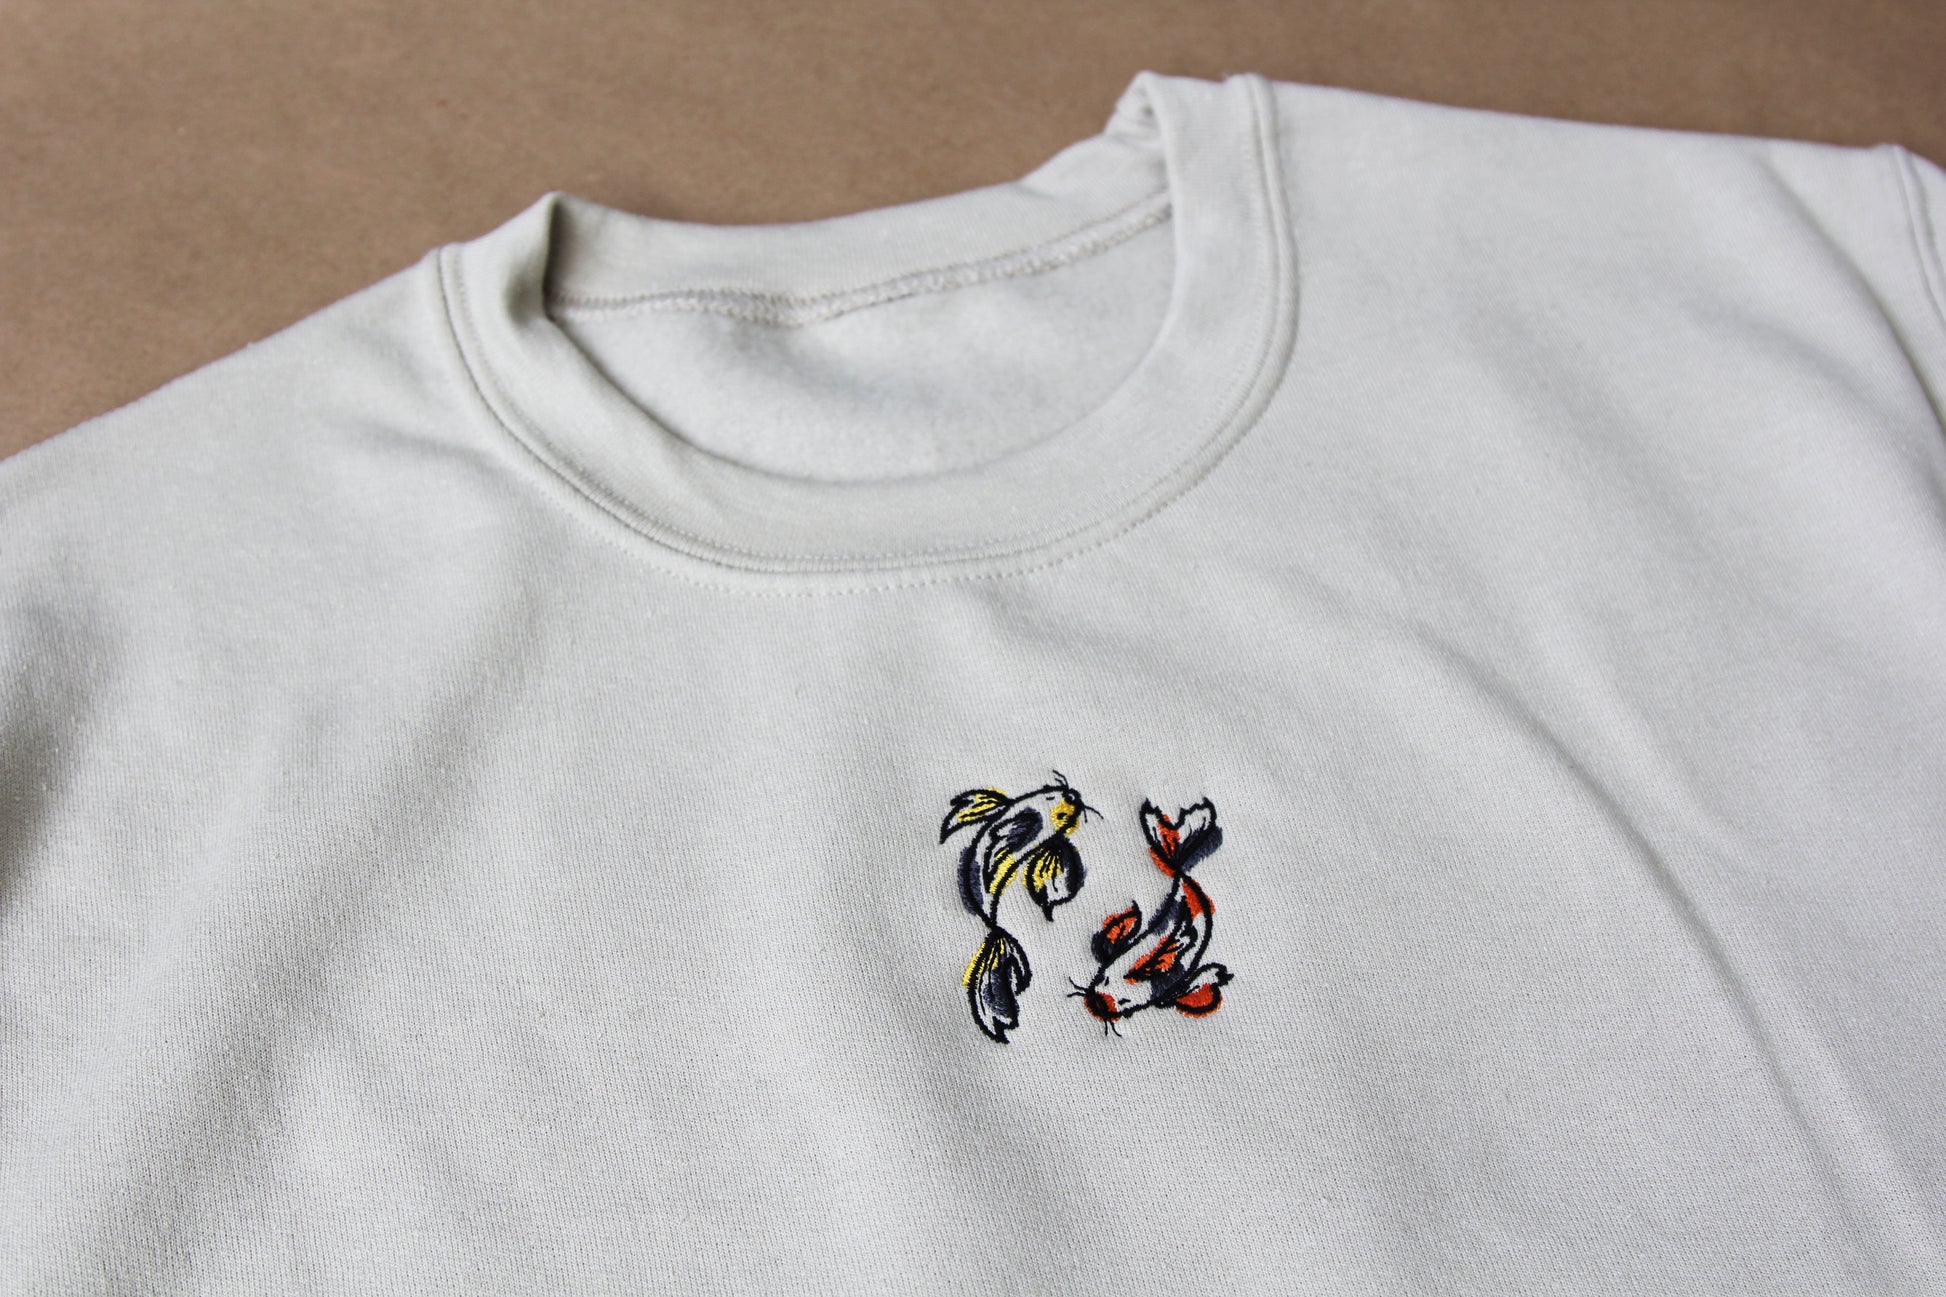 A closeup photo of 2 koi fish embroidered on the front center of a cream crew neck sweatshirt over a tan background.